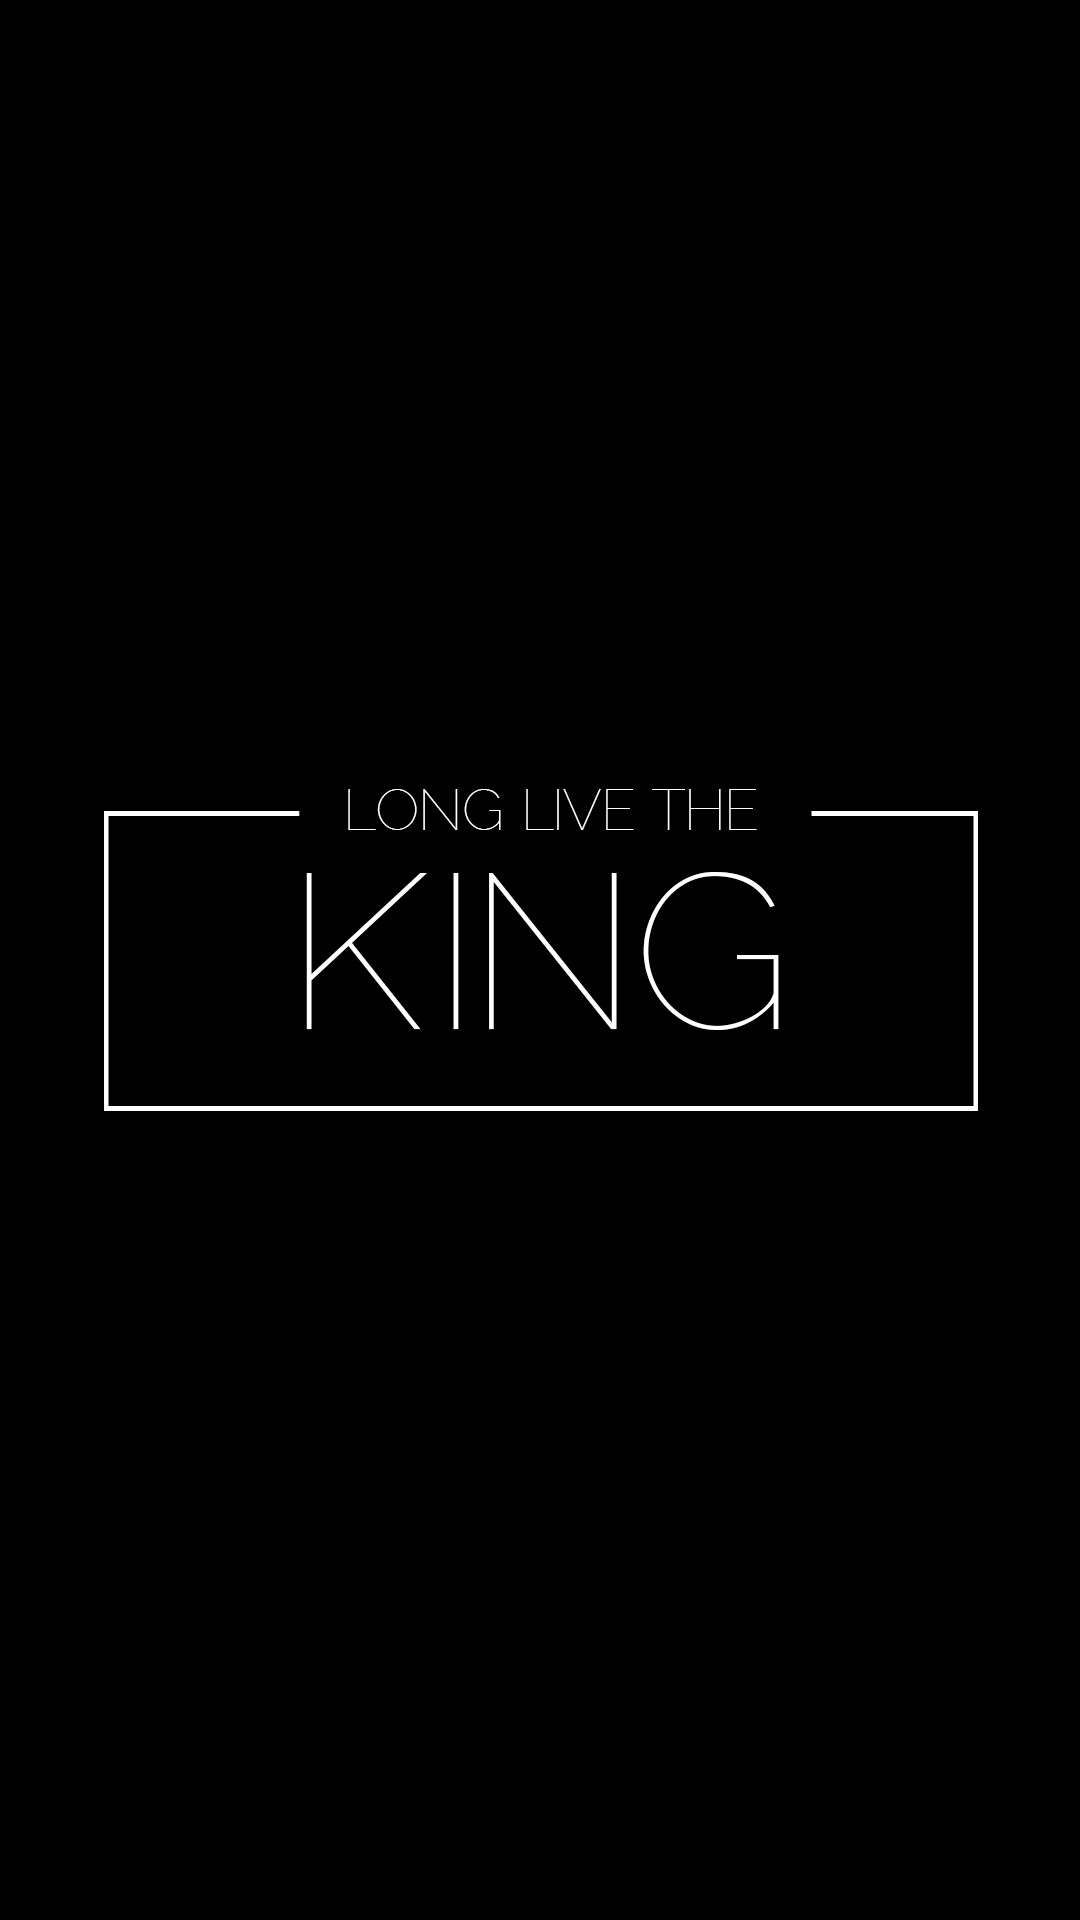 King, Live like a king, wallpapers, 1080x1920 Full HD Phone